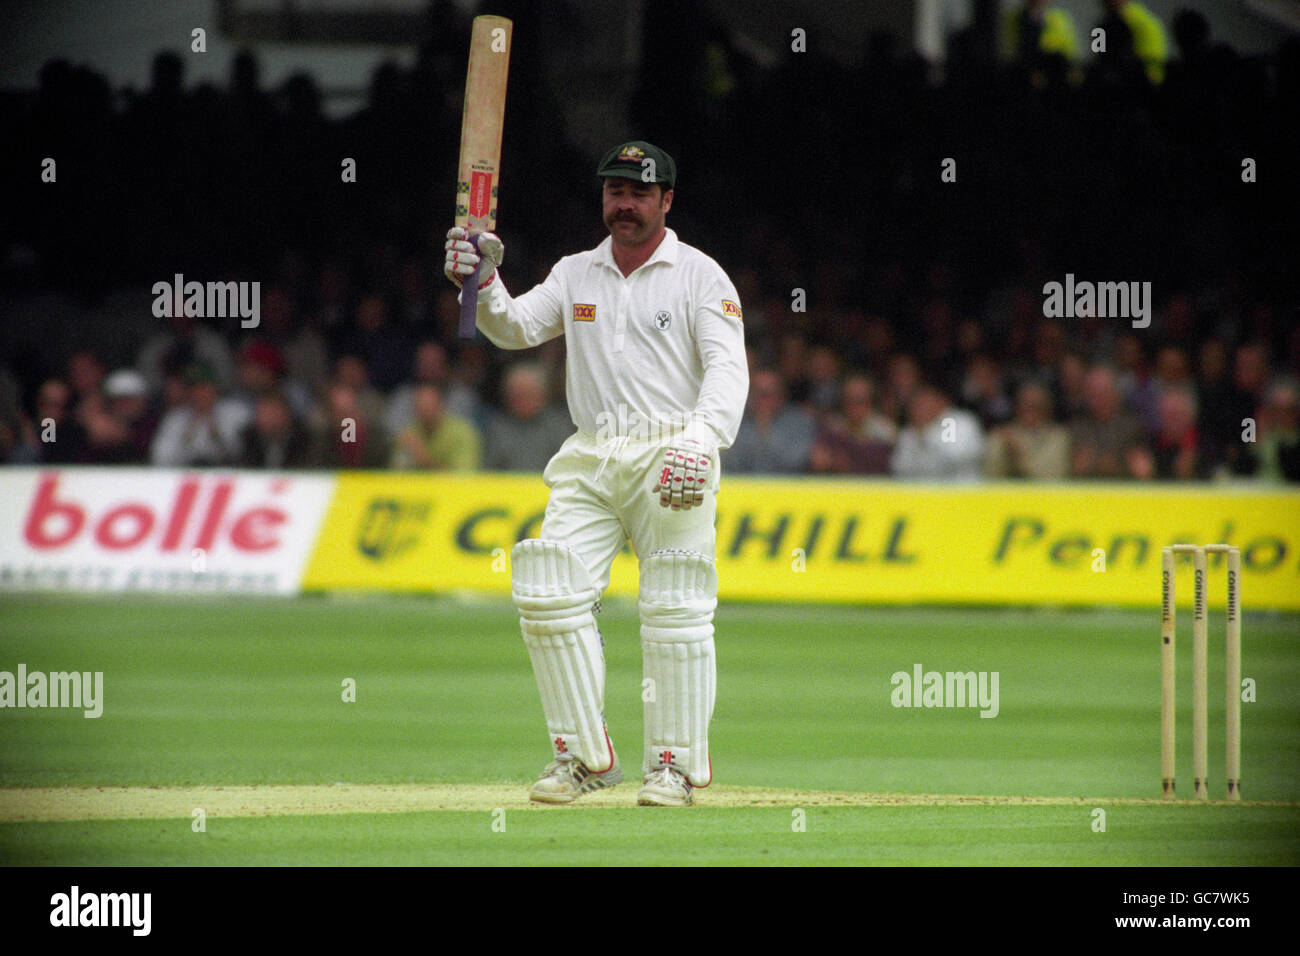 Cricket - The Ashes - England v Australia - 2nd Test - Lord's. AUSTRALIA'S DAVID BOON ACKNOWLEDGES THE CROWD UPON REACHING 50 DURING THE SECOND TEST AGAINST ENGLAND AT LORDS. Stock Photo